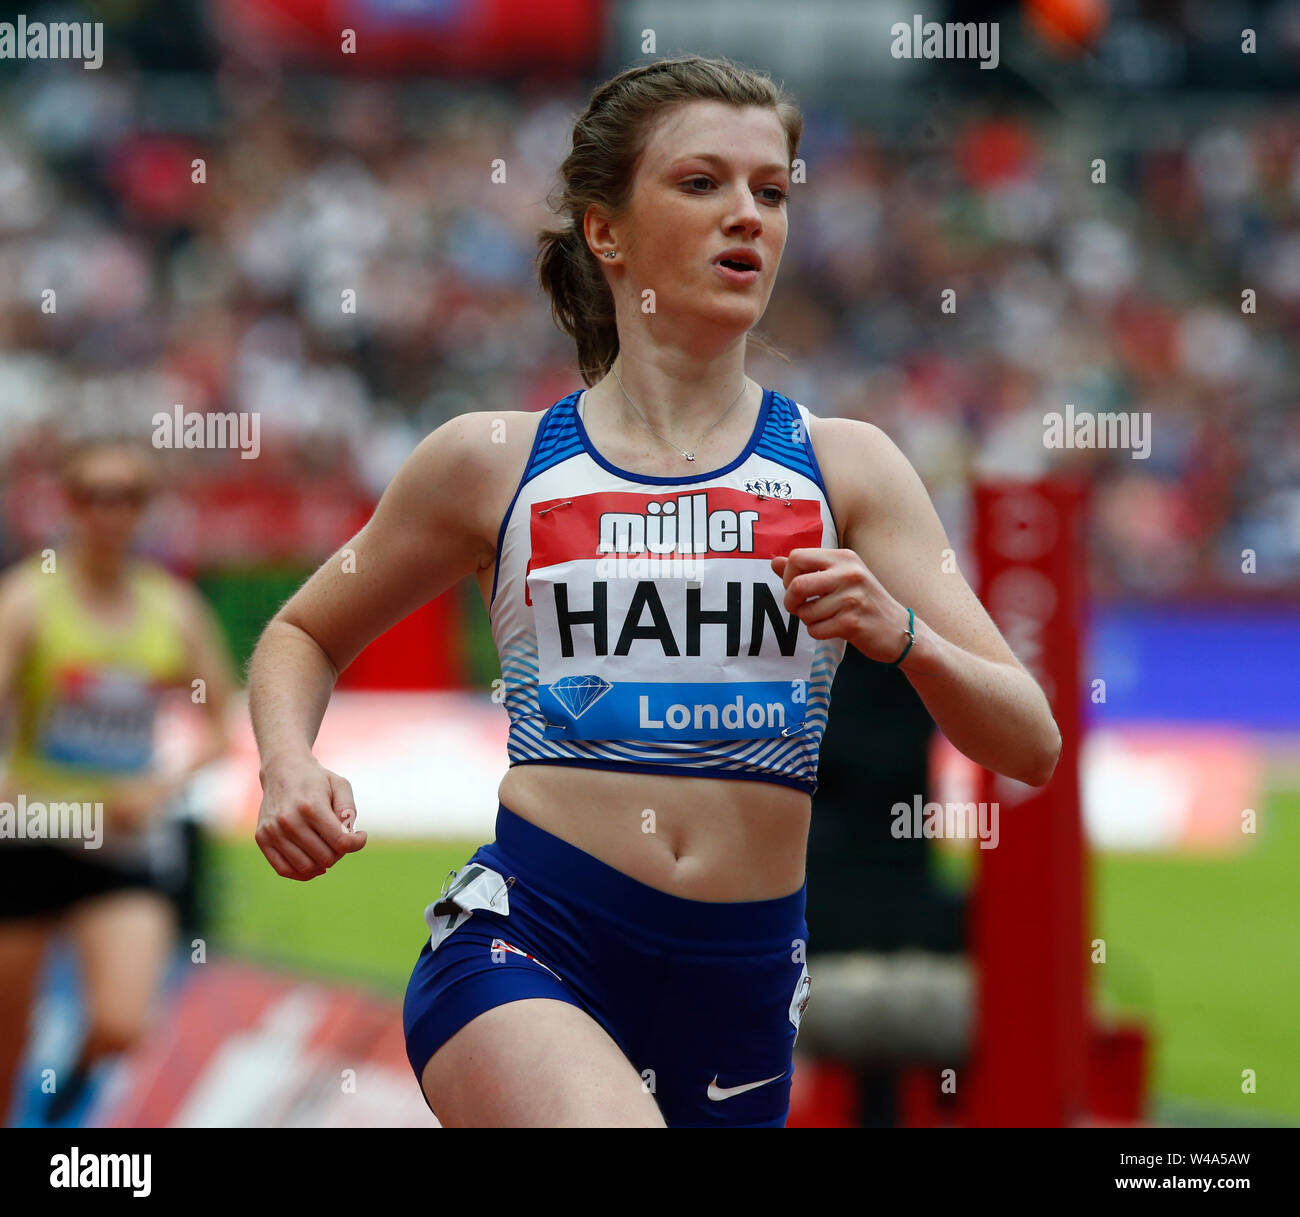 London, UK. 21st July, 2019. LONDON, ENGLAND. JULY 21: Sophie Hahn (GBR) Winner of the T35/38 100M Women during Day Two of IAAF Diamond League the Muller Anniversary Games at London Stadium on July 20, 2019 in London, England. Credit: Action Foto Sport/Alamy Live News Stock Photo